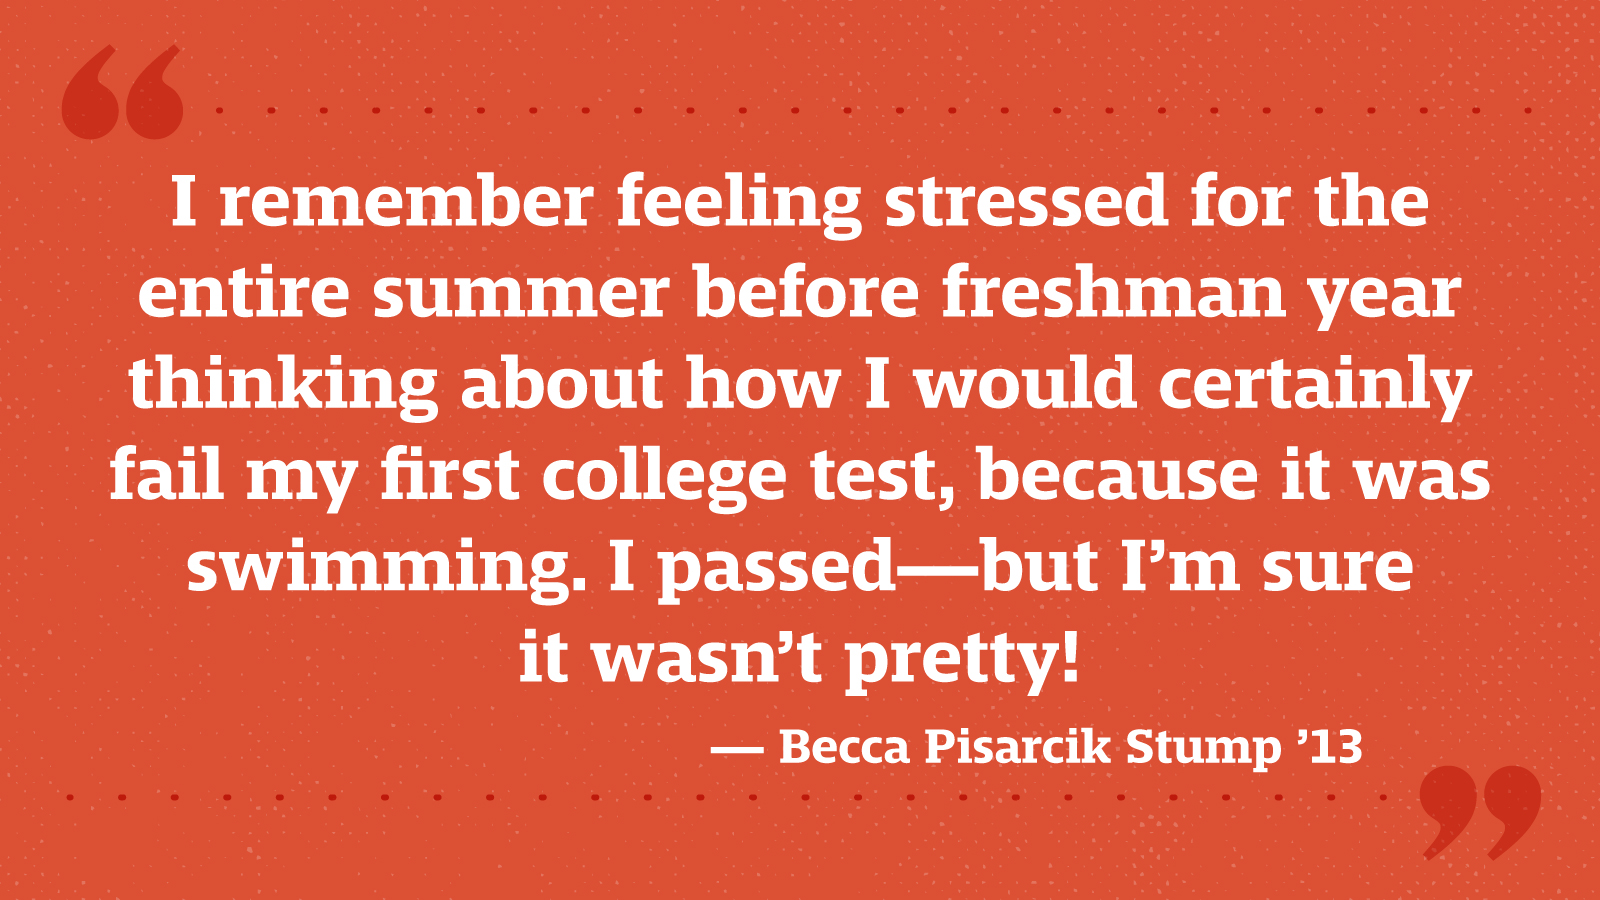 I remember feeling stressed for the entire summer before freshman year thinking about how I would certainly fail my first college test, because it was swimming. I passed—but I’m sure it wasn’t pretty! — Becca Pisarcik Stump ’13